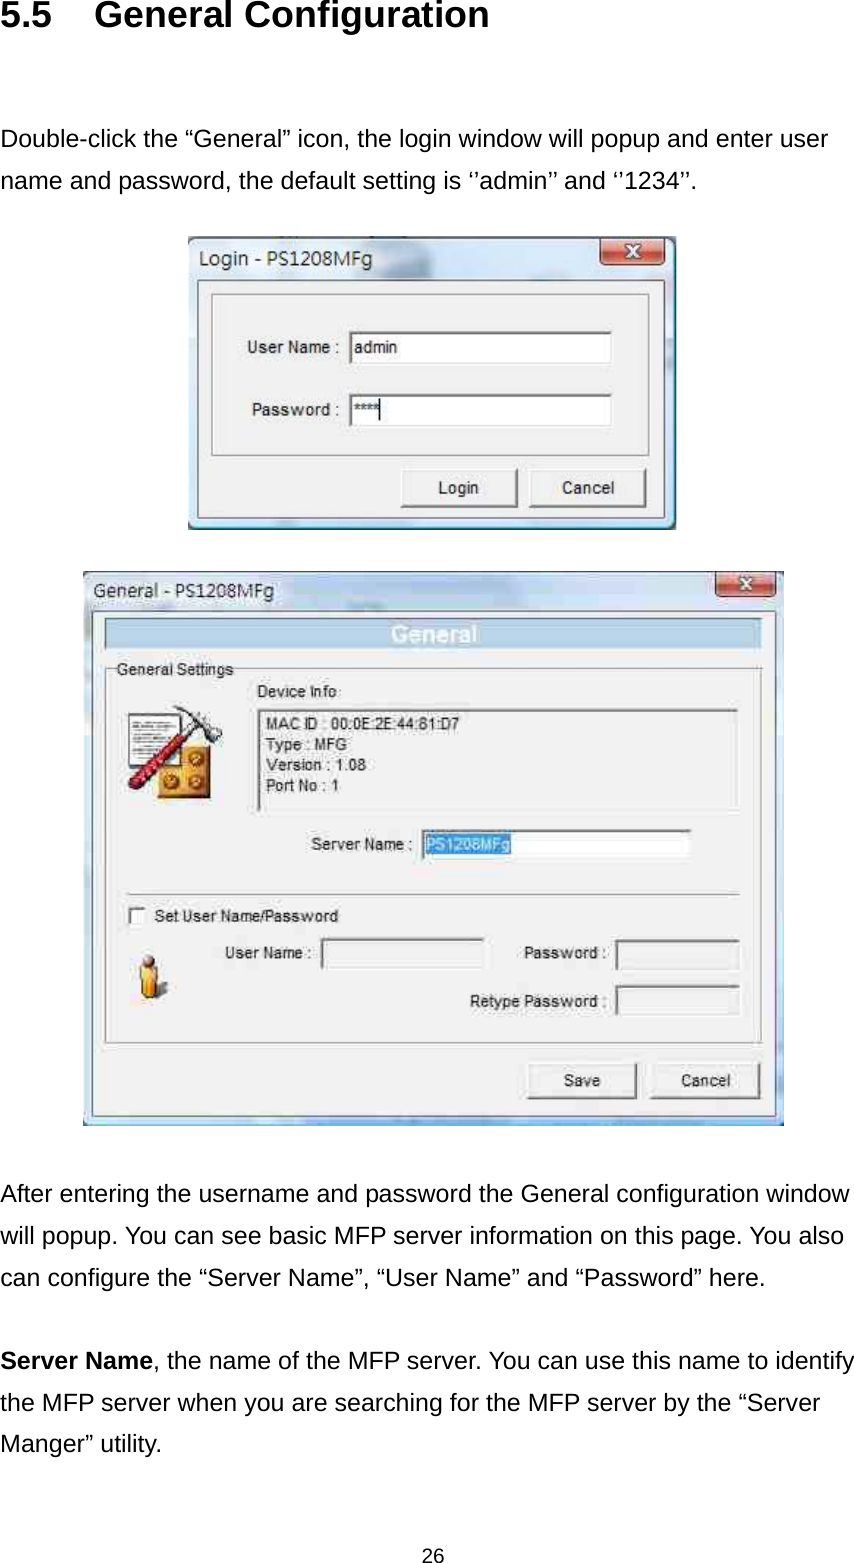 26 5.5 General Configuration  Double-click the “General” icon, the login window will popup and enter user name and password, the default setting is ‘’admin’’ and ‘’1234’’.        After entering the username and password the General configuration window will popup. You can see basic MFP server information on this page. You also can configure the “Server Name”, “User Name” and “Password” here.  Server Name, the name of the MFP server. You can use this name to identify the MFP server when you are searching for the MFP server by the “Server Manger” utility.  